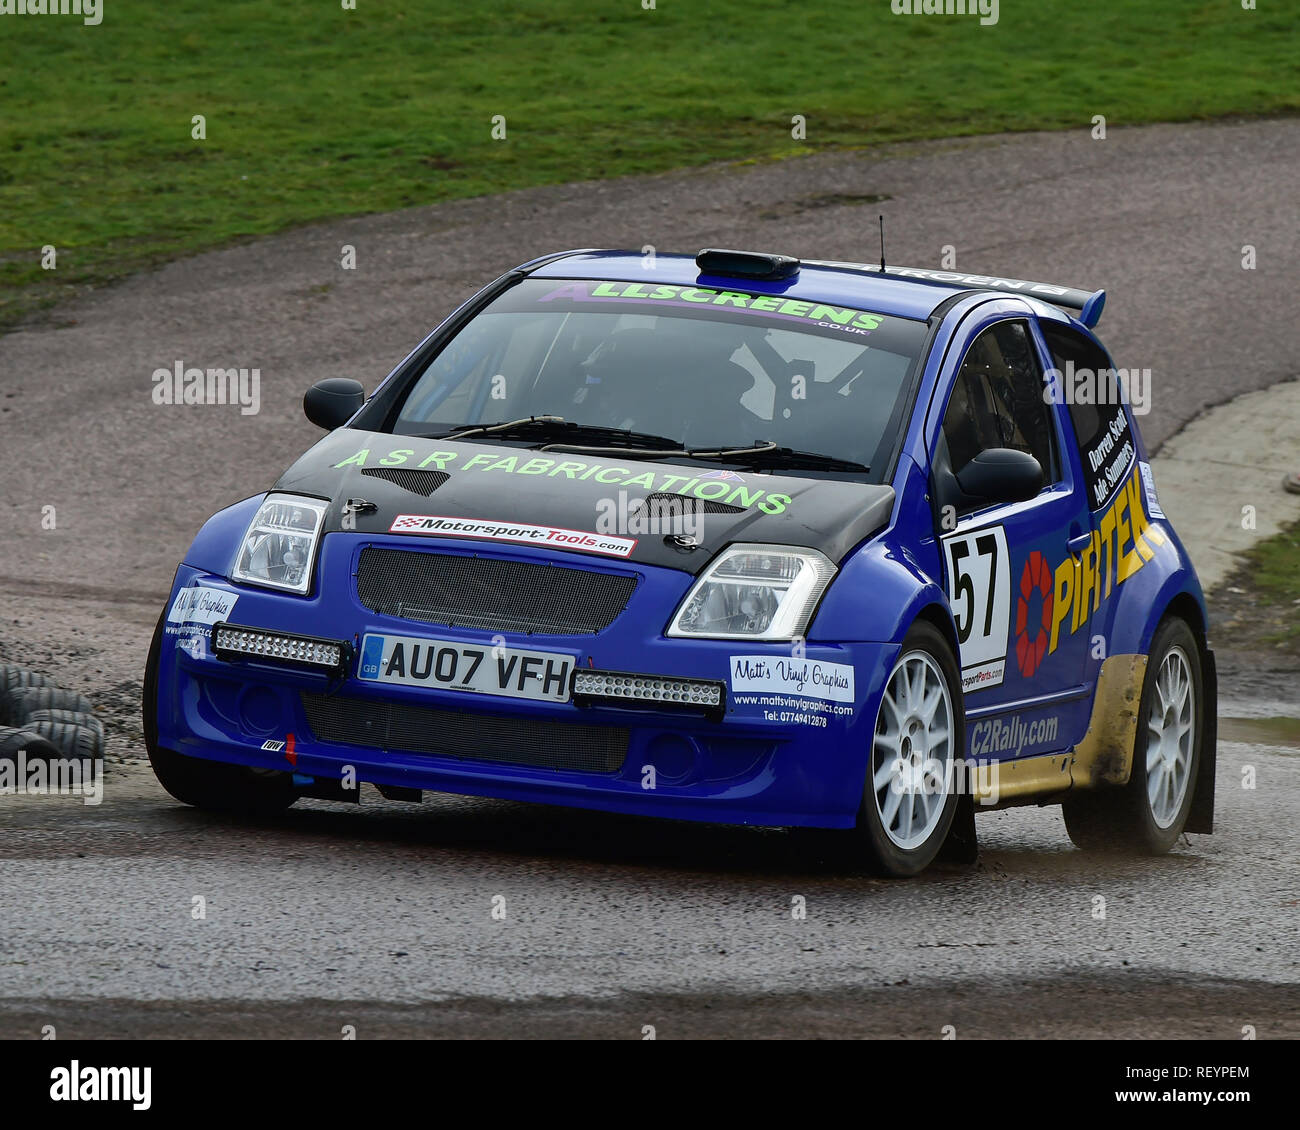 Darren Scott, Ade Summers, Citroen C2 S1600, MGJ Rally Stages, Chelmsford Motor Club, Brands Hatch,  Saturday, 19th January 2019, MSV, Circuit Rally C Stock Photo